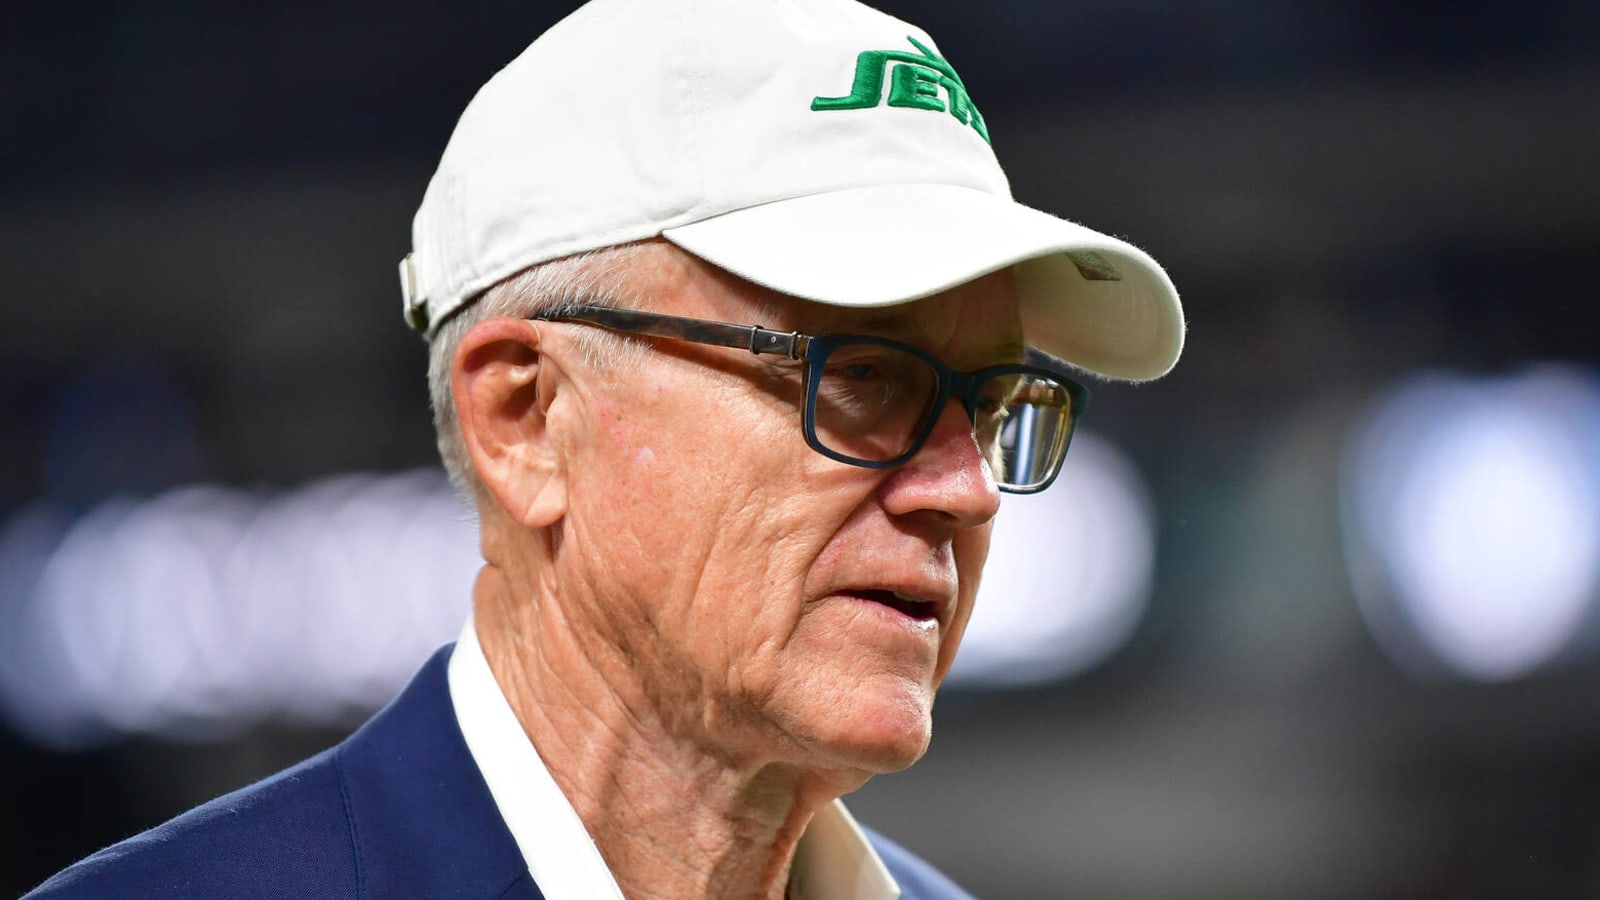 Jets Owner Woody Johnson Mourns Passing of Richard Caster